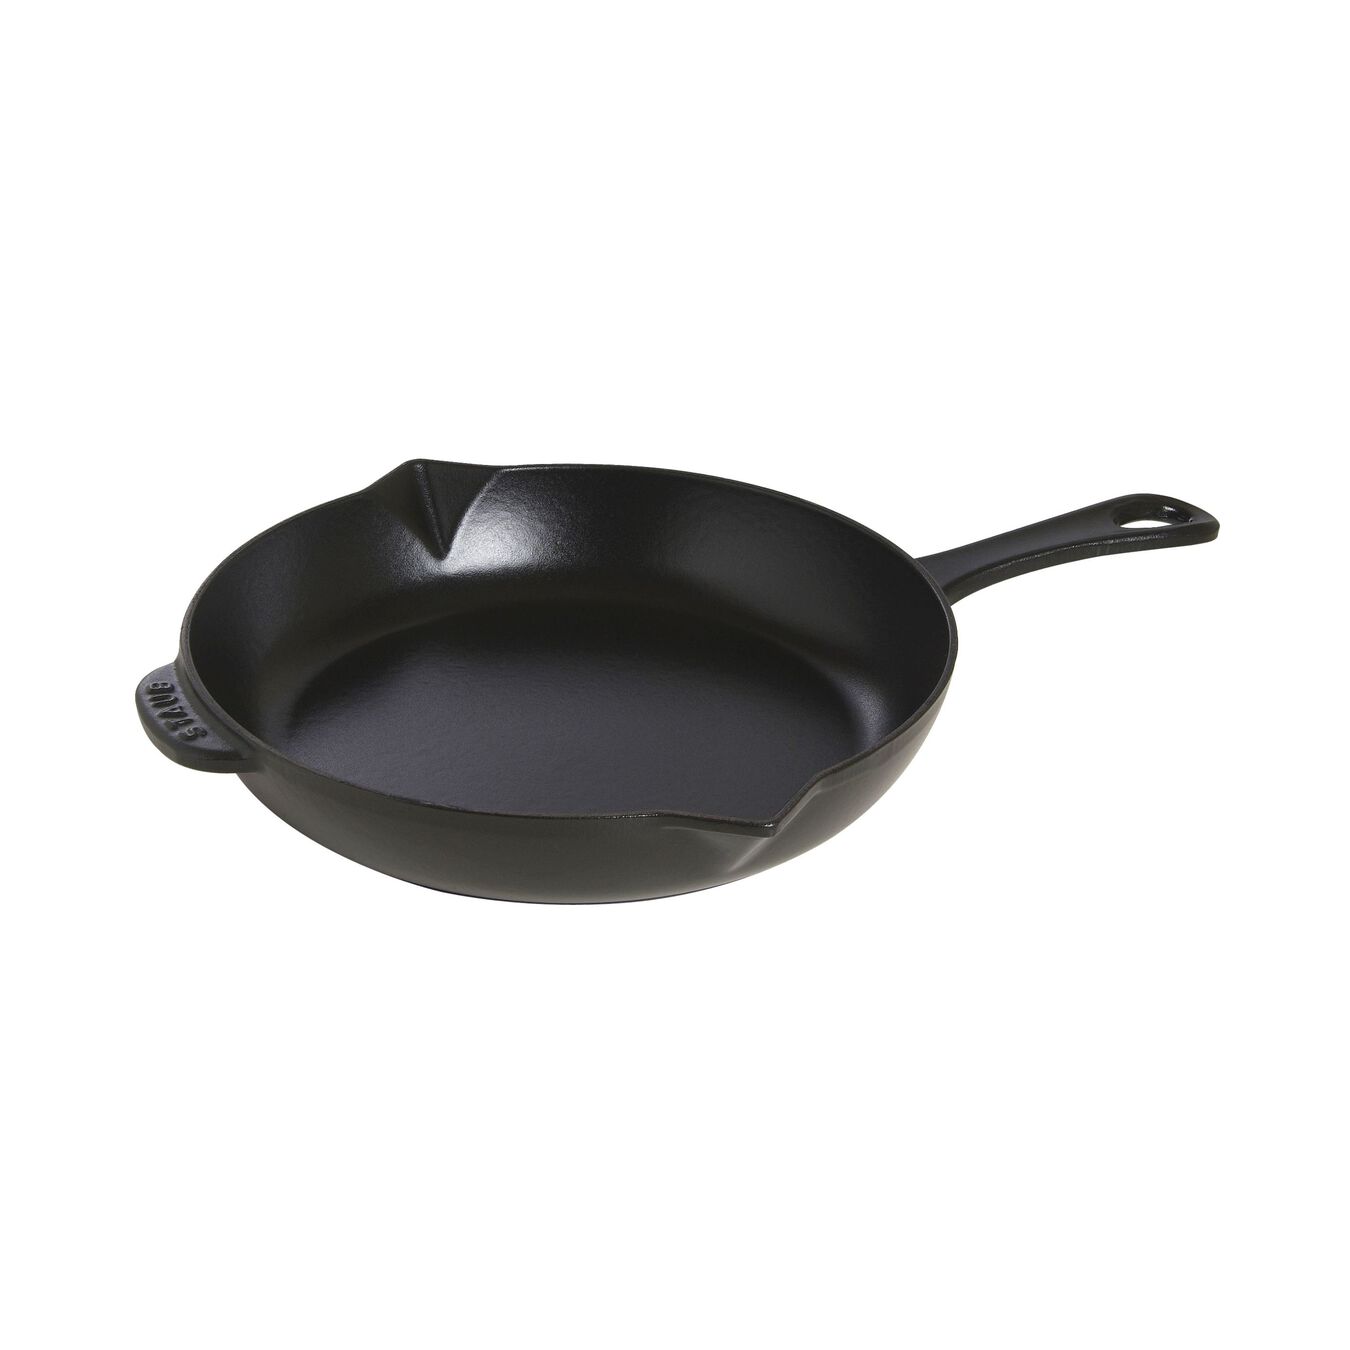 26 cm / 10 inch cast iron Frying pan with pouring spout, black - Visual Imperfections,,large 1